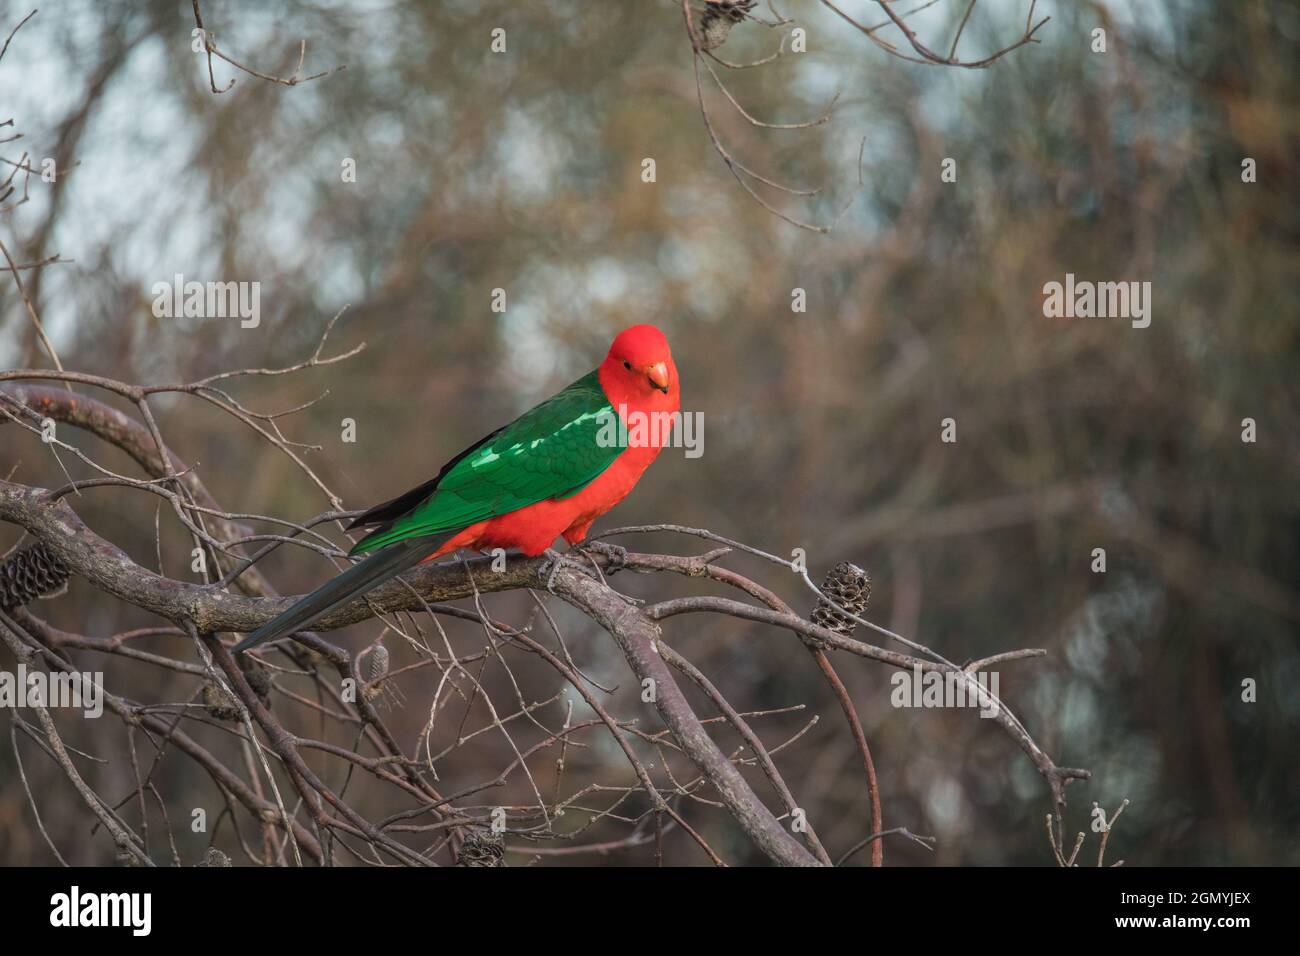 Australian King Parrot Perched in tree Stock Photo